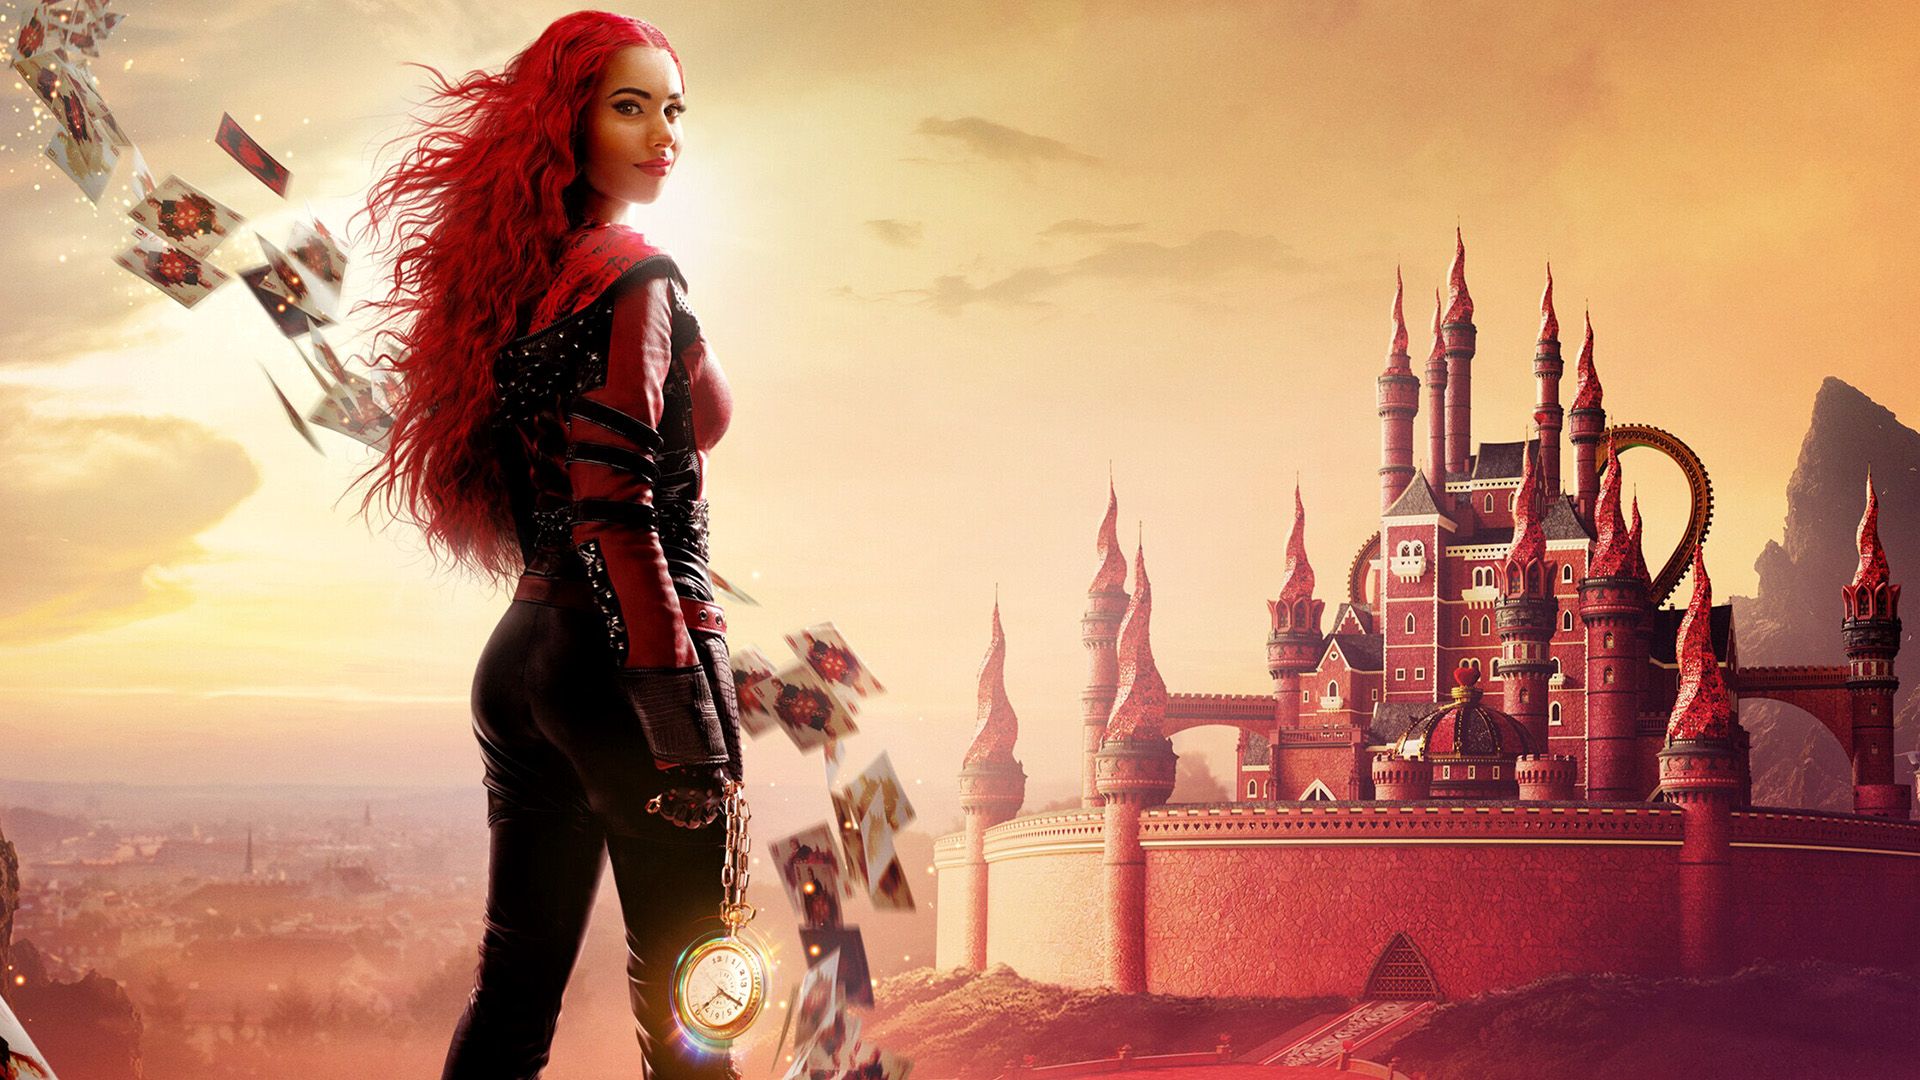 Descendants: The Rise of Red background